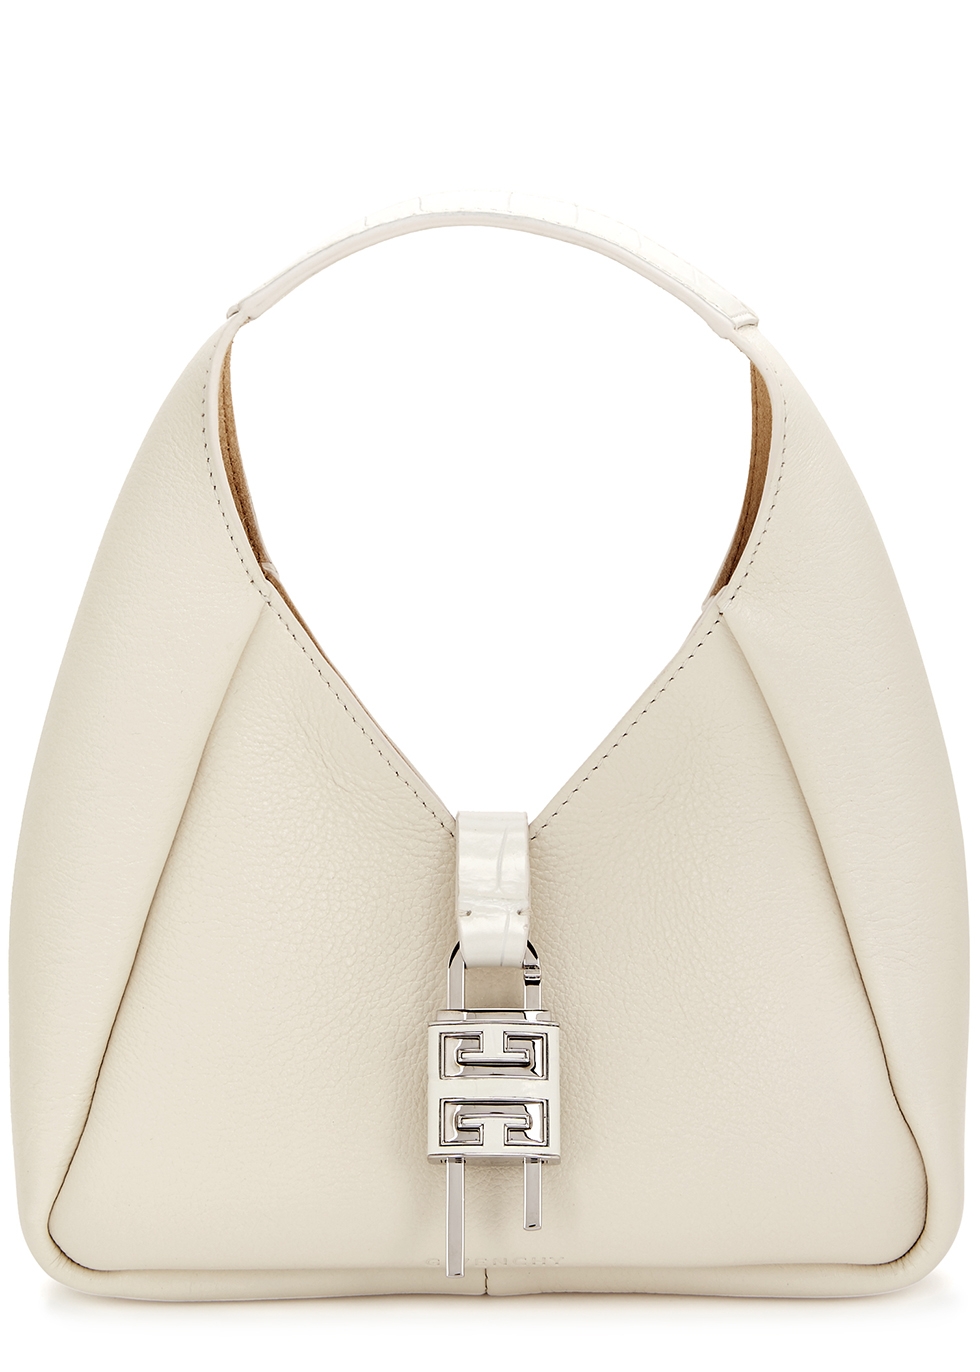 Mango Bag With Short Chain Handle Off in White Womens Bags Top-handle bags 